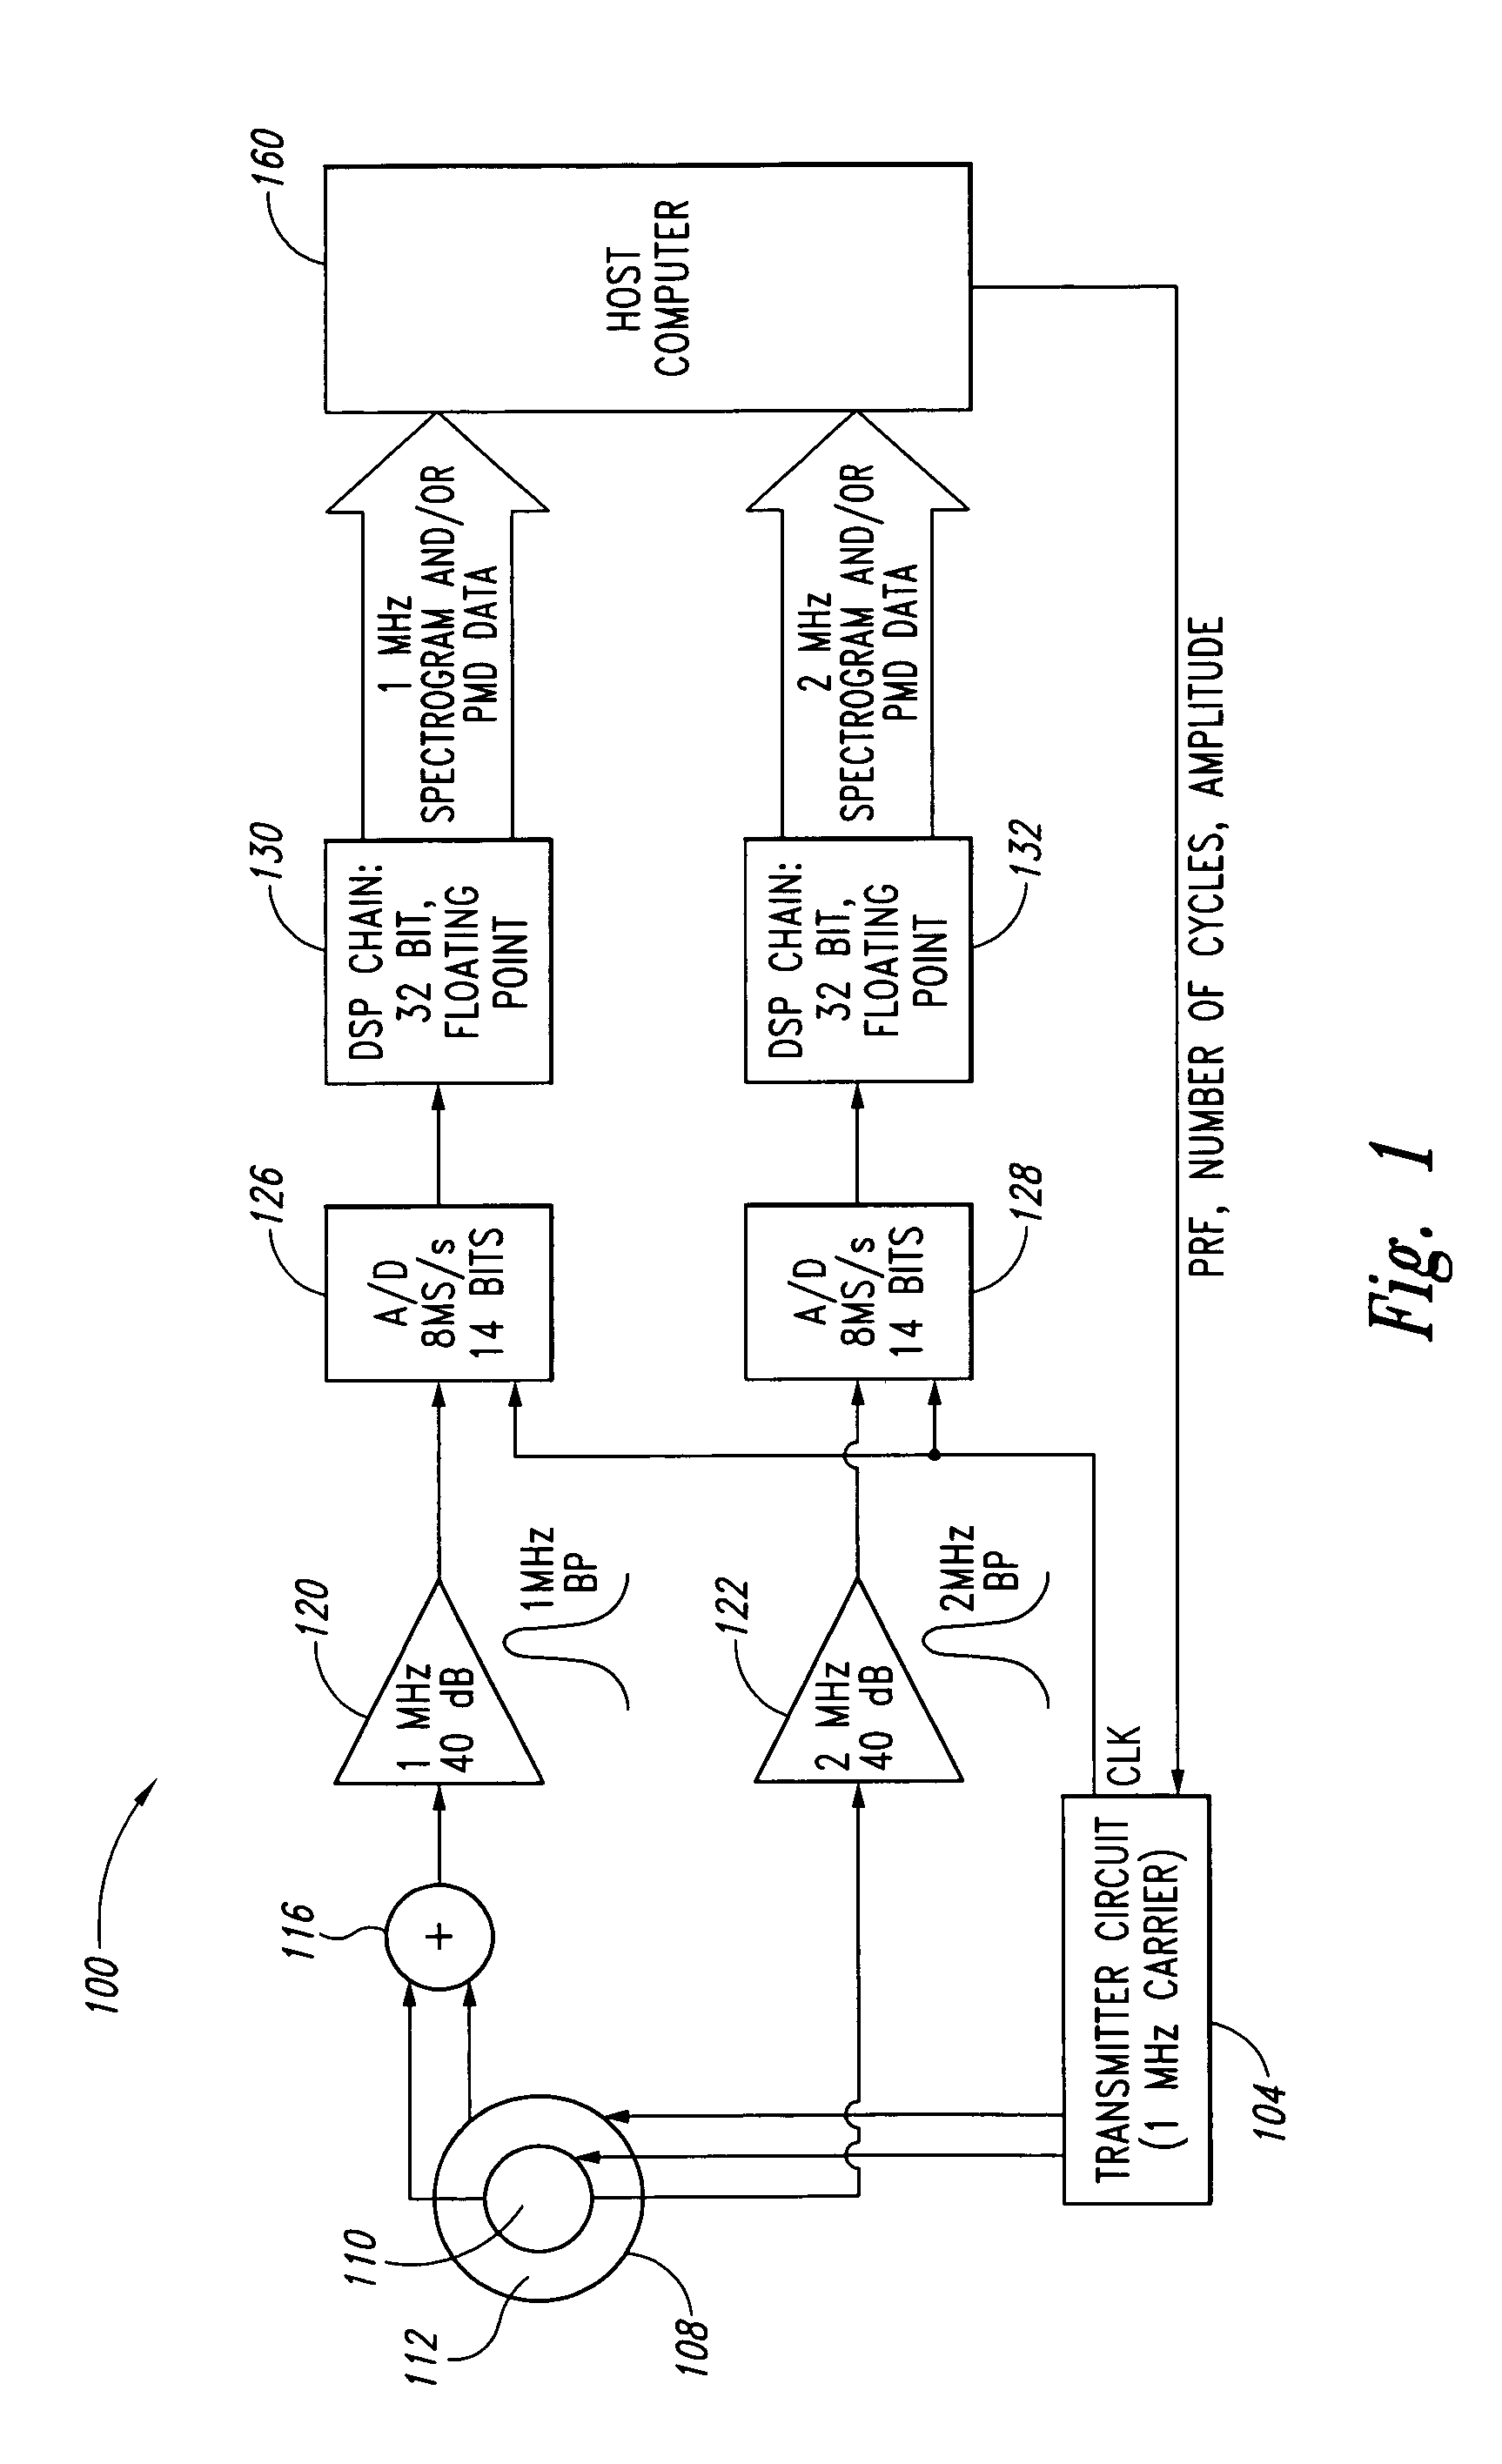 Doppler ultrasound processing system and method for concurrent acquisition of ultrasound signals at multiple carrier frequencies, embolus characterization system and method, and ultrasound transducer